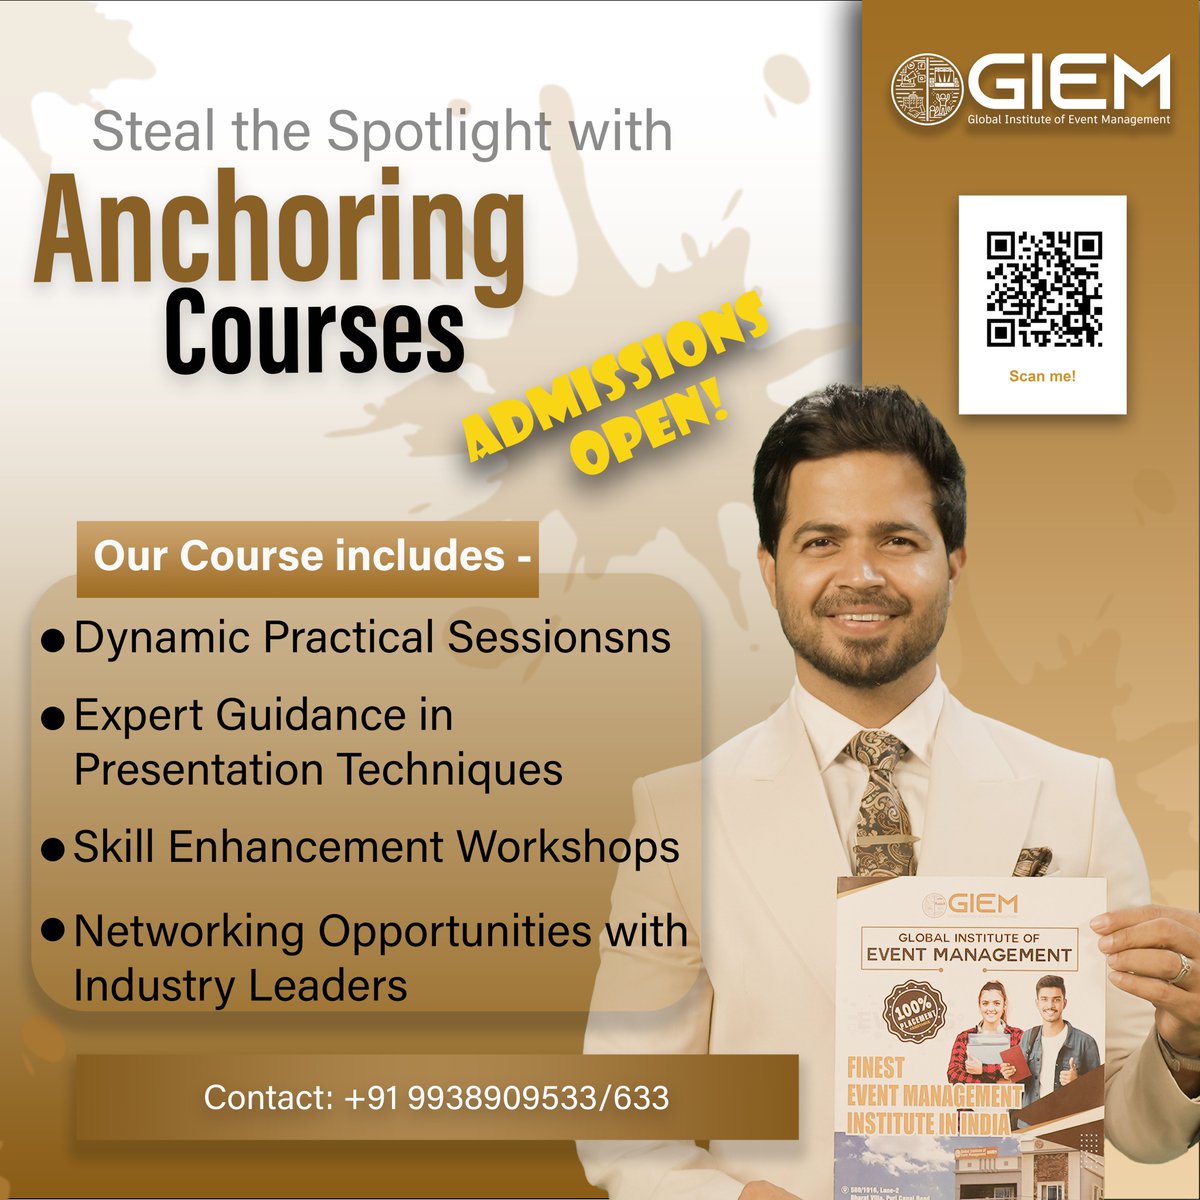 Steal the spotlight and own the stage with Anchoring Courses at #GIEM!

Contact us at +91 9938909533/633, Or,
to know more details, Visit our website: giem.in to kickstart your journey.

#AnchoringCareer #GIEM #AdmissionOpen #OwnTheStage #CareerOpportunities